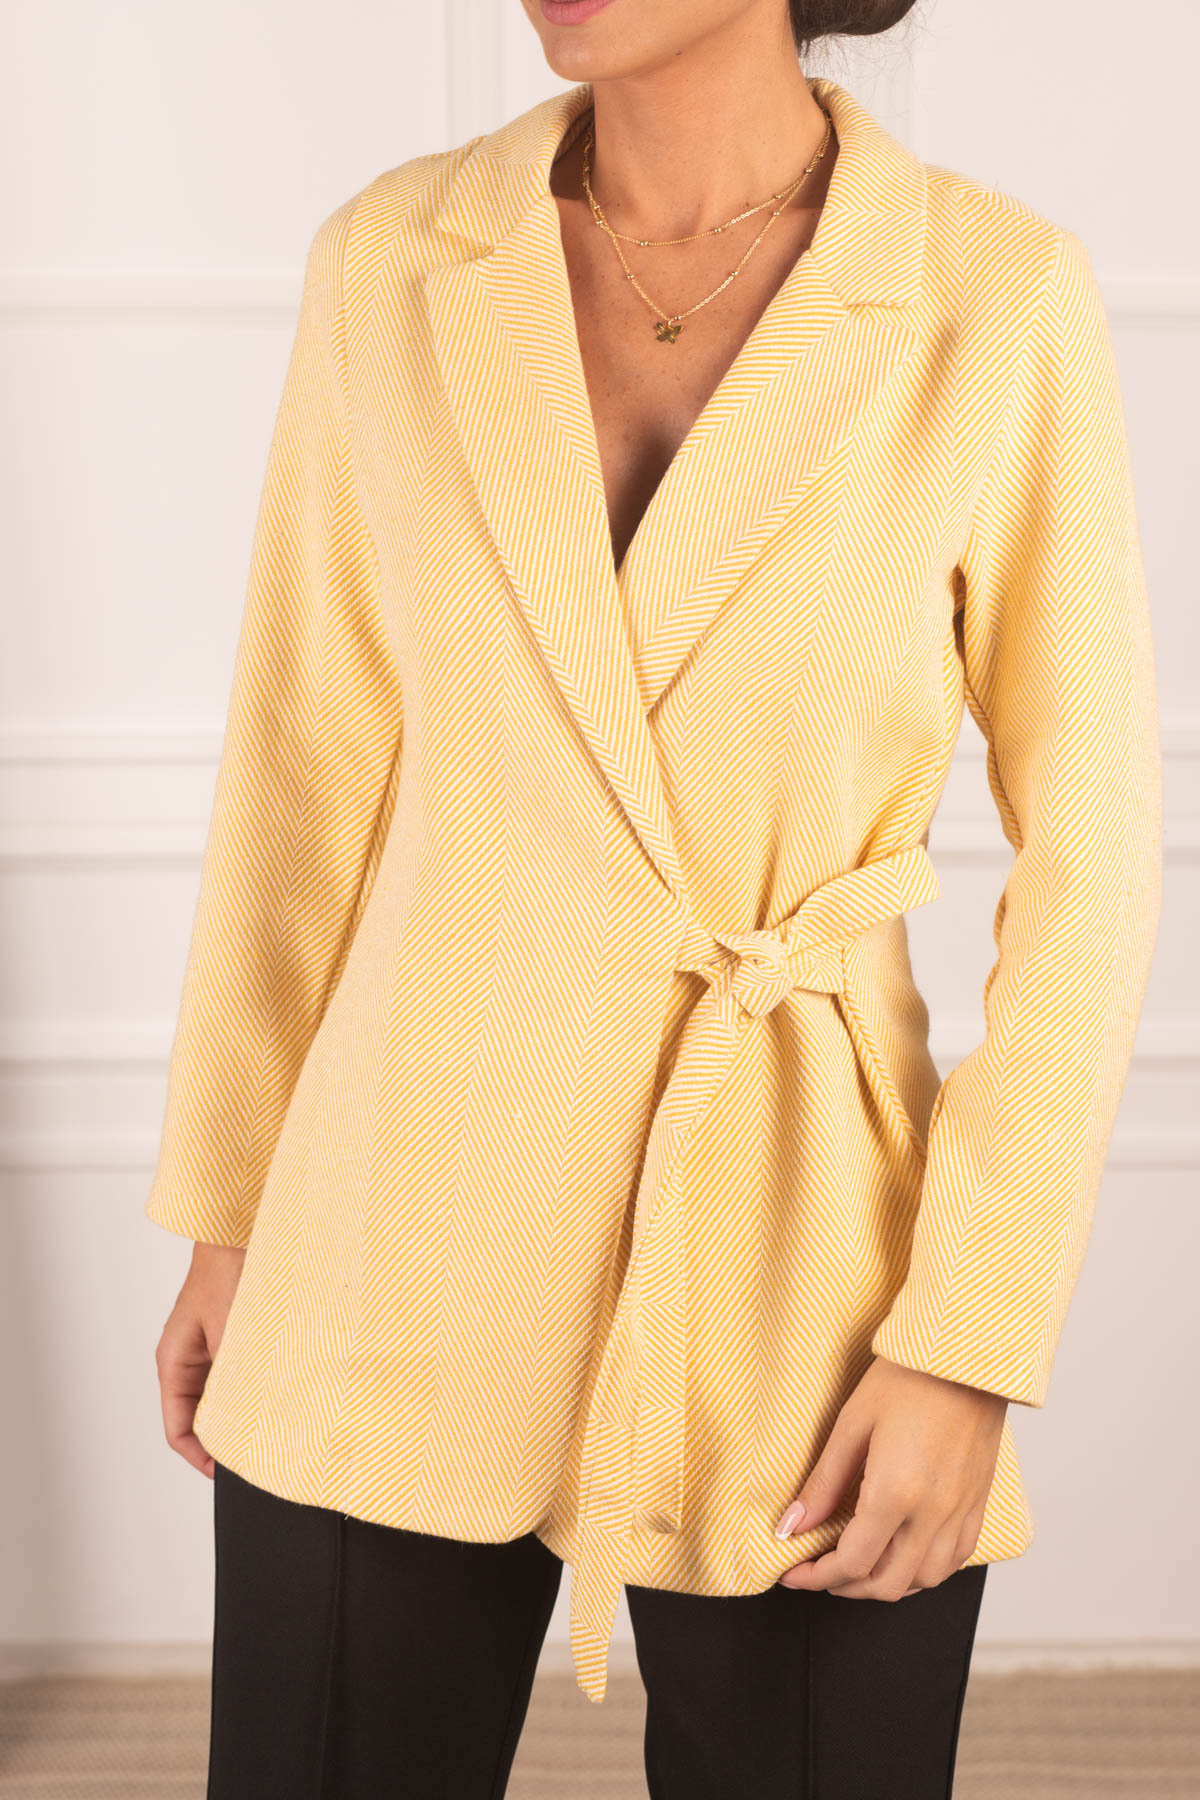 armonika Women's Yellow Herringbone Patterned Stamped Jacket with Tie Sides